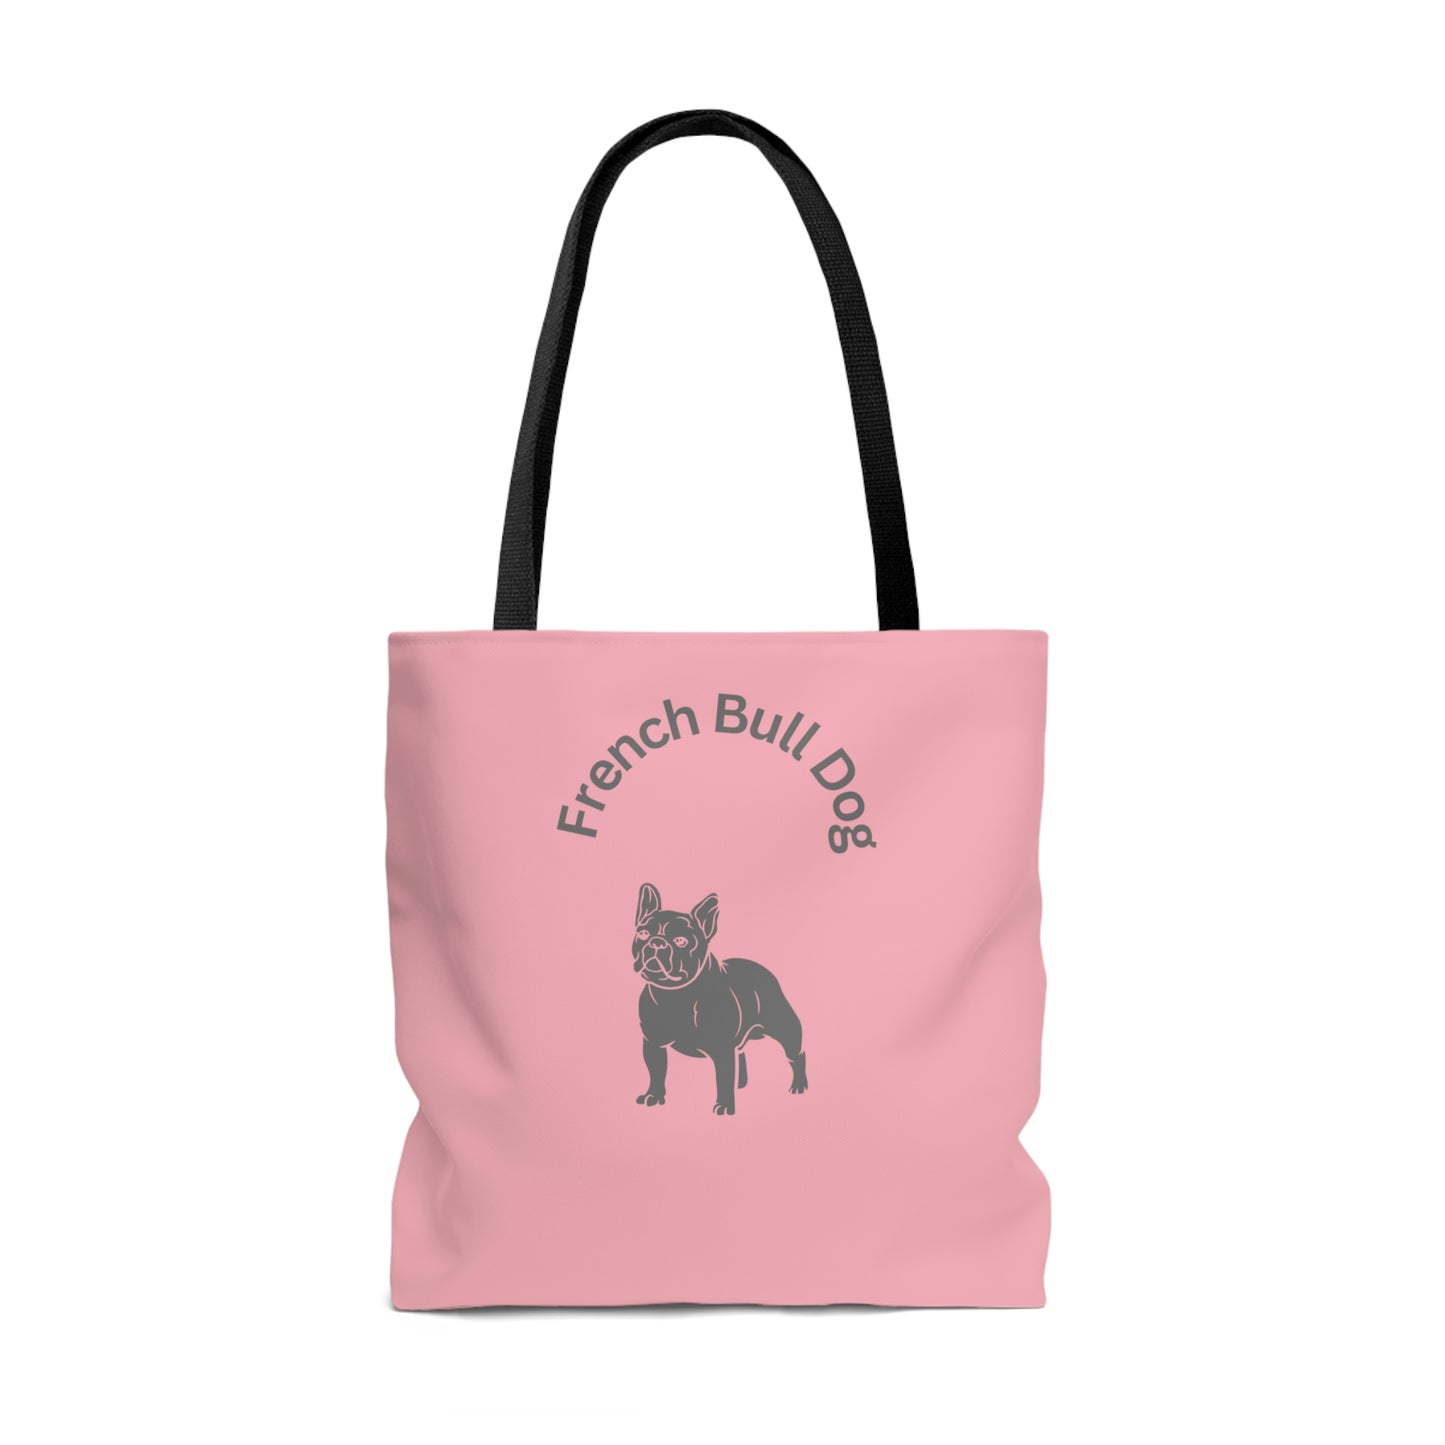 Frenchie Pink Tote Bag | BKLA | shoes & accessories | backpack, hat, phone cover, tote bags, clutch bags